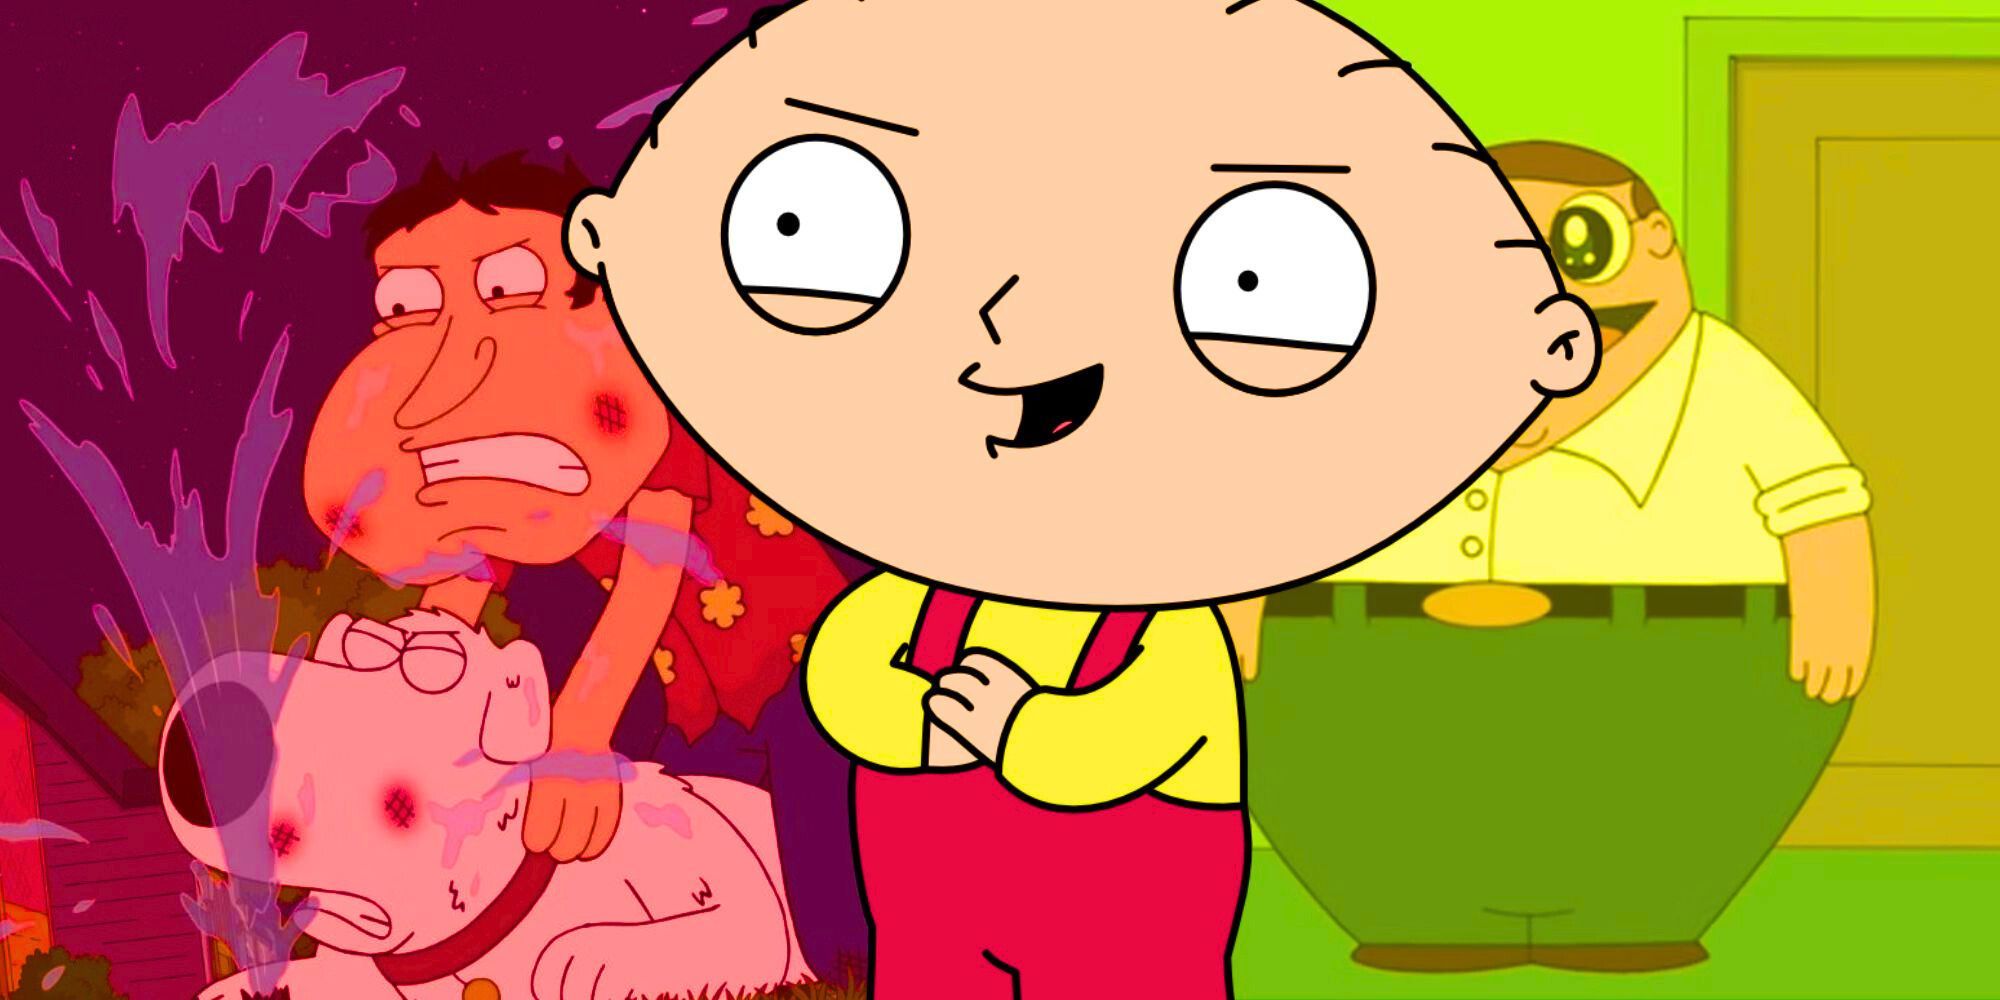 Stewie Griffin against a backdrop of other Family Guy characters